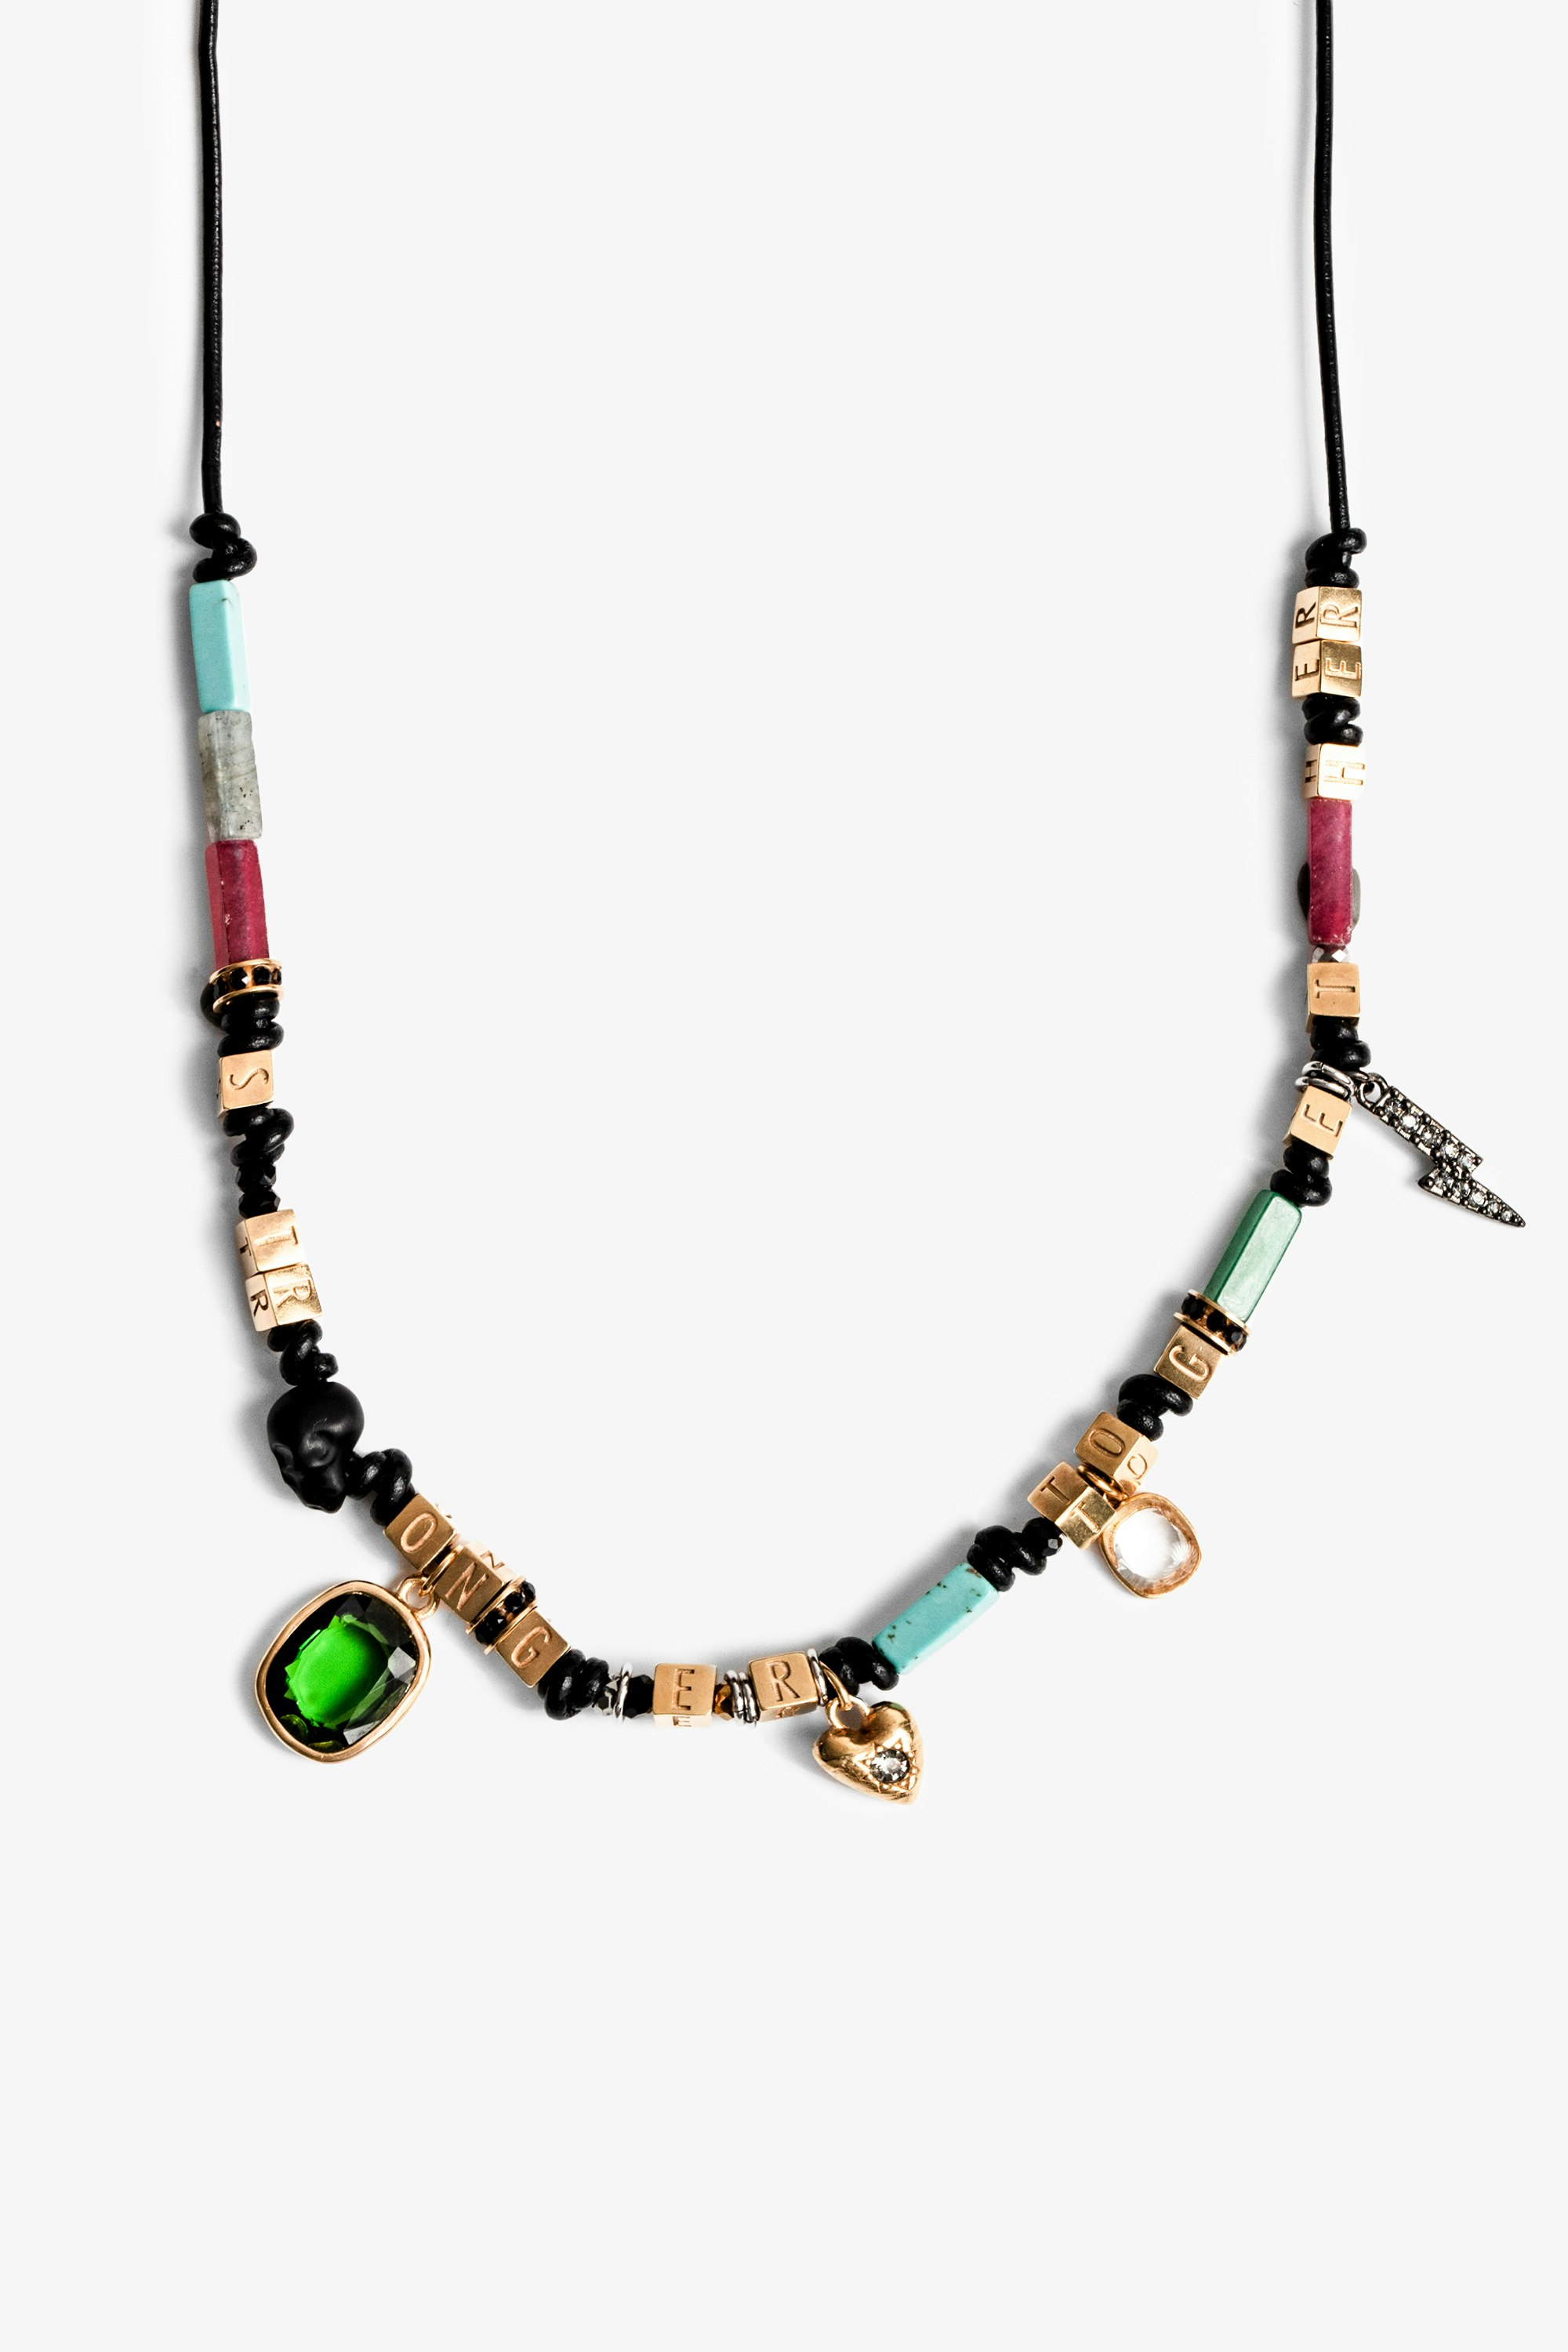 Mix n Match Full Charms ネックレス Women’s cord necklace with metal charms and stones